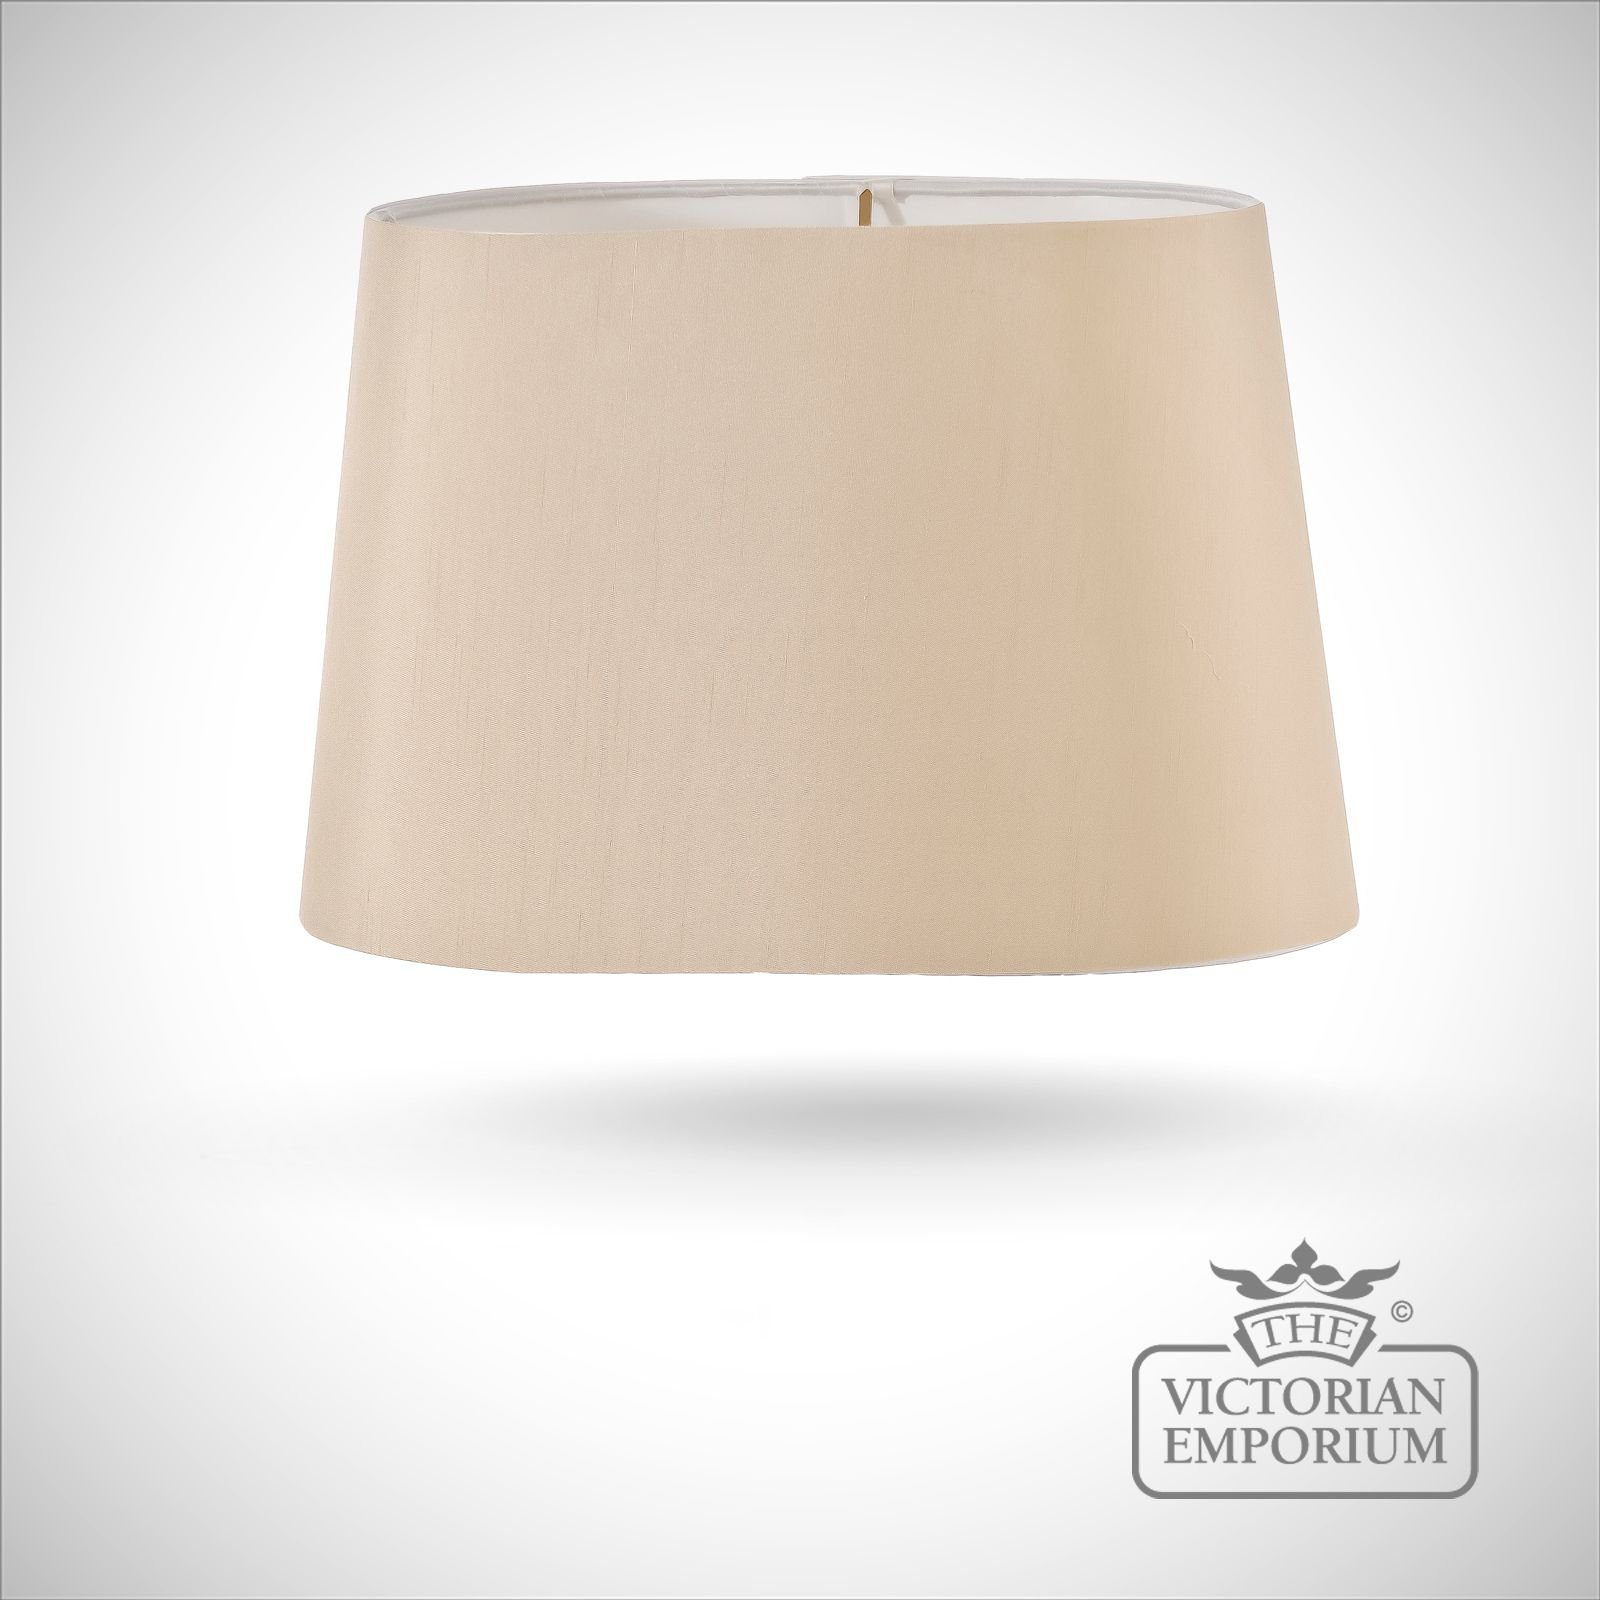 Tapered Oval Lamp Shade in Camel - 39cm